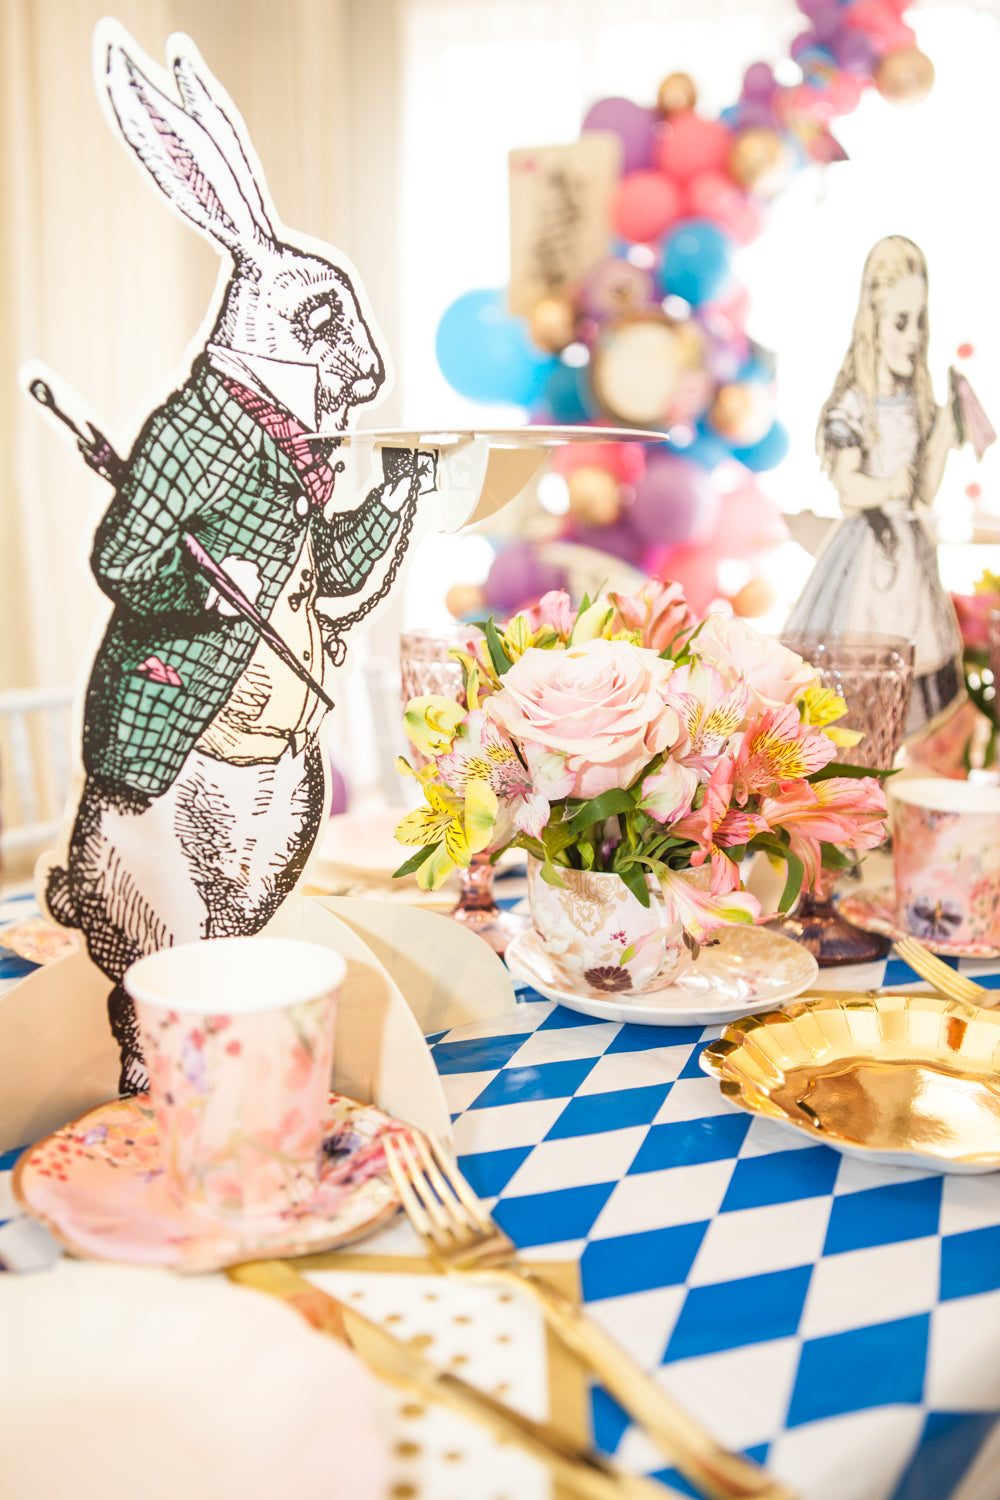 Alice in Wonderland party theme is perfect for both kid's/girl's birthday party or a mad hatters tea party, garden party. We includes everything you need to throw  magical party to wow your guests. 